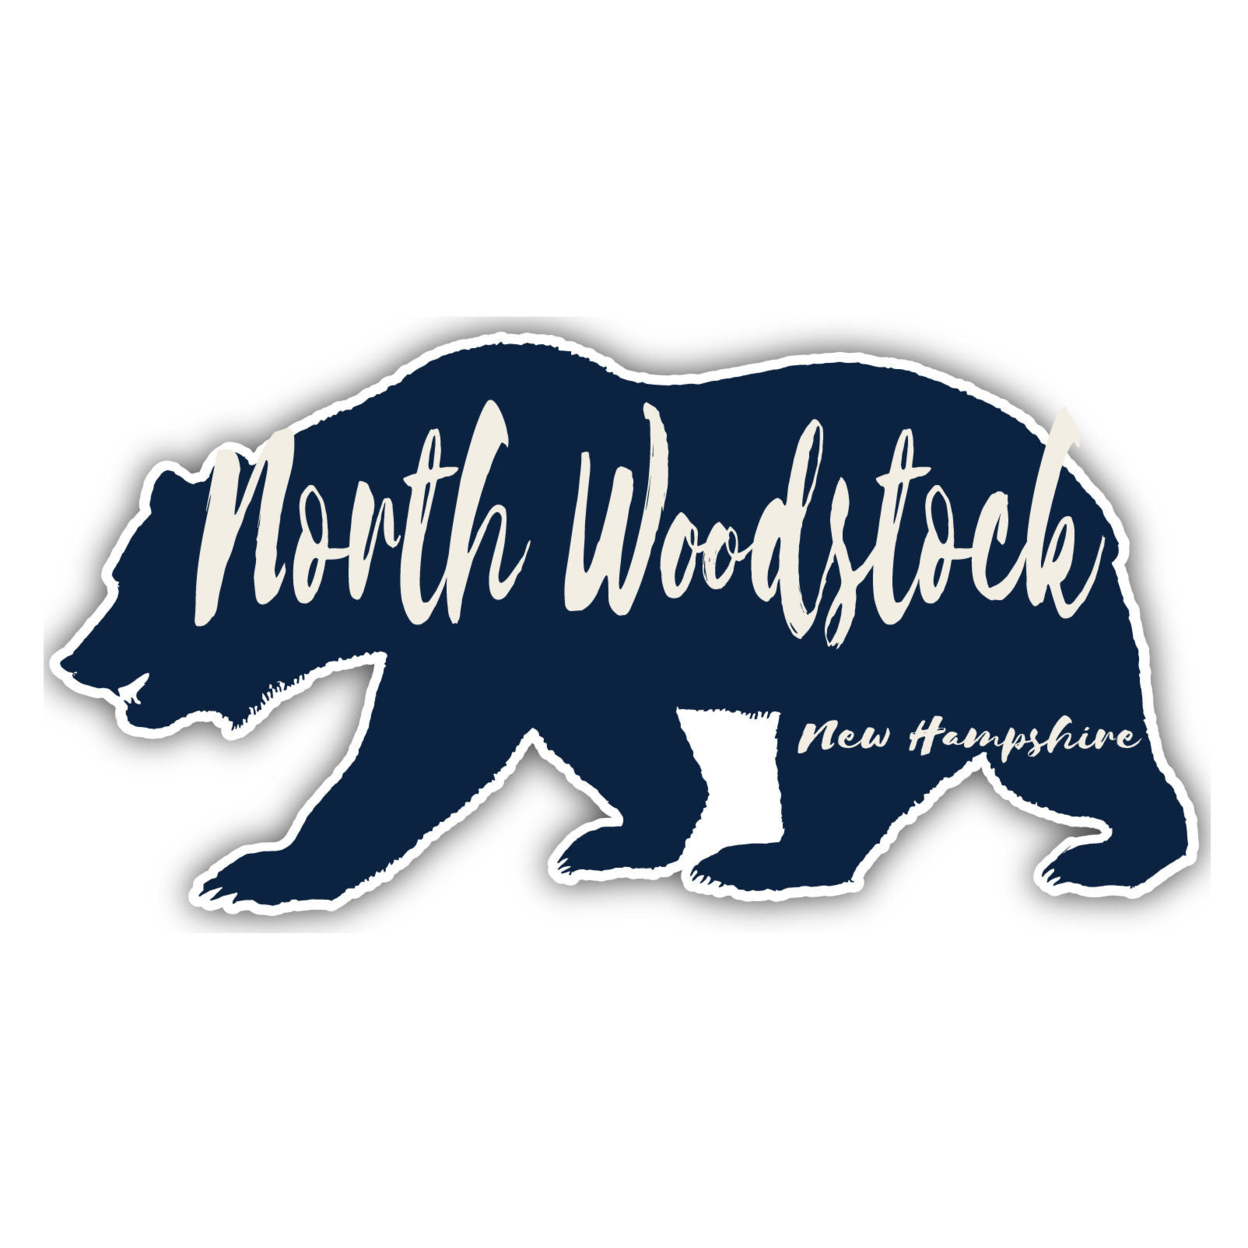 North Woodstock New Hampshire Souvenir Decorative Stickers (Choose Theme And Size) - Single Unit, 4-Inch, Bear